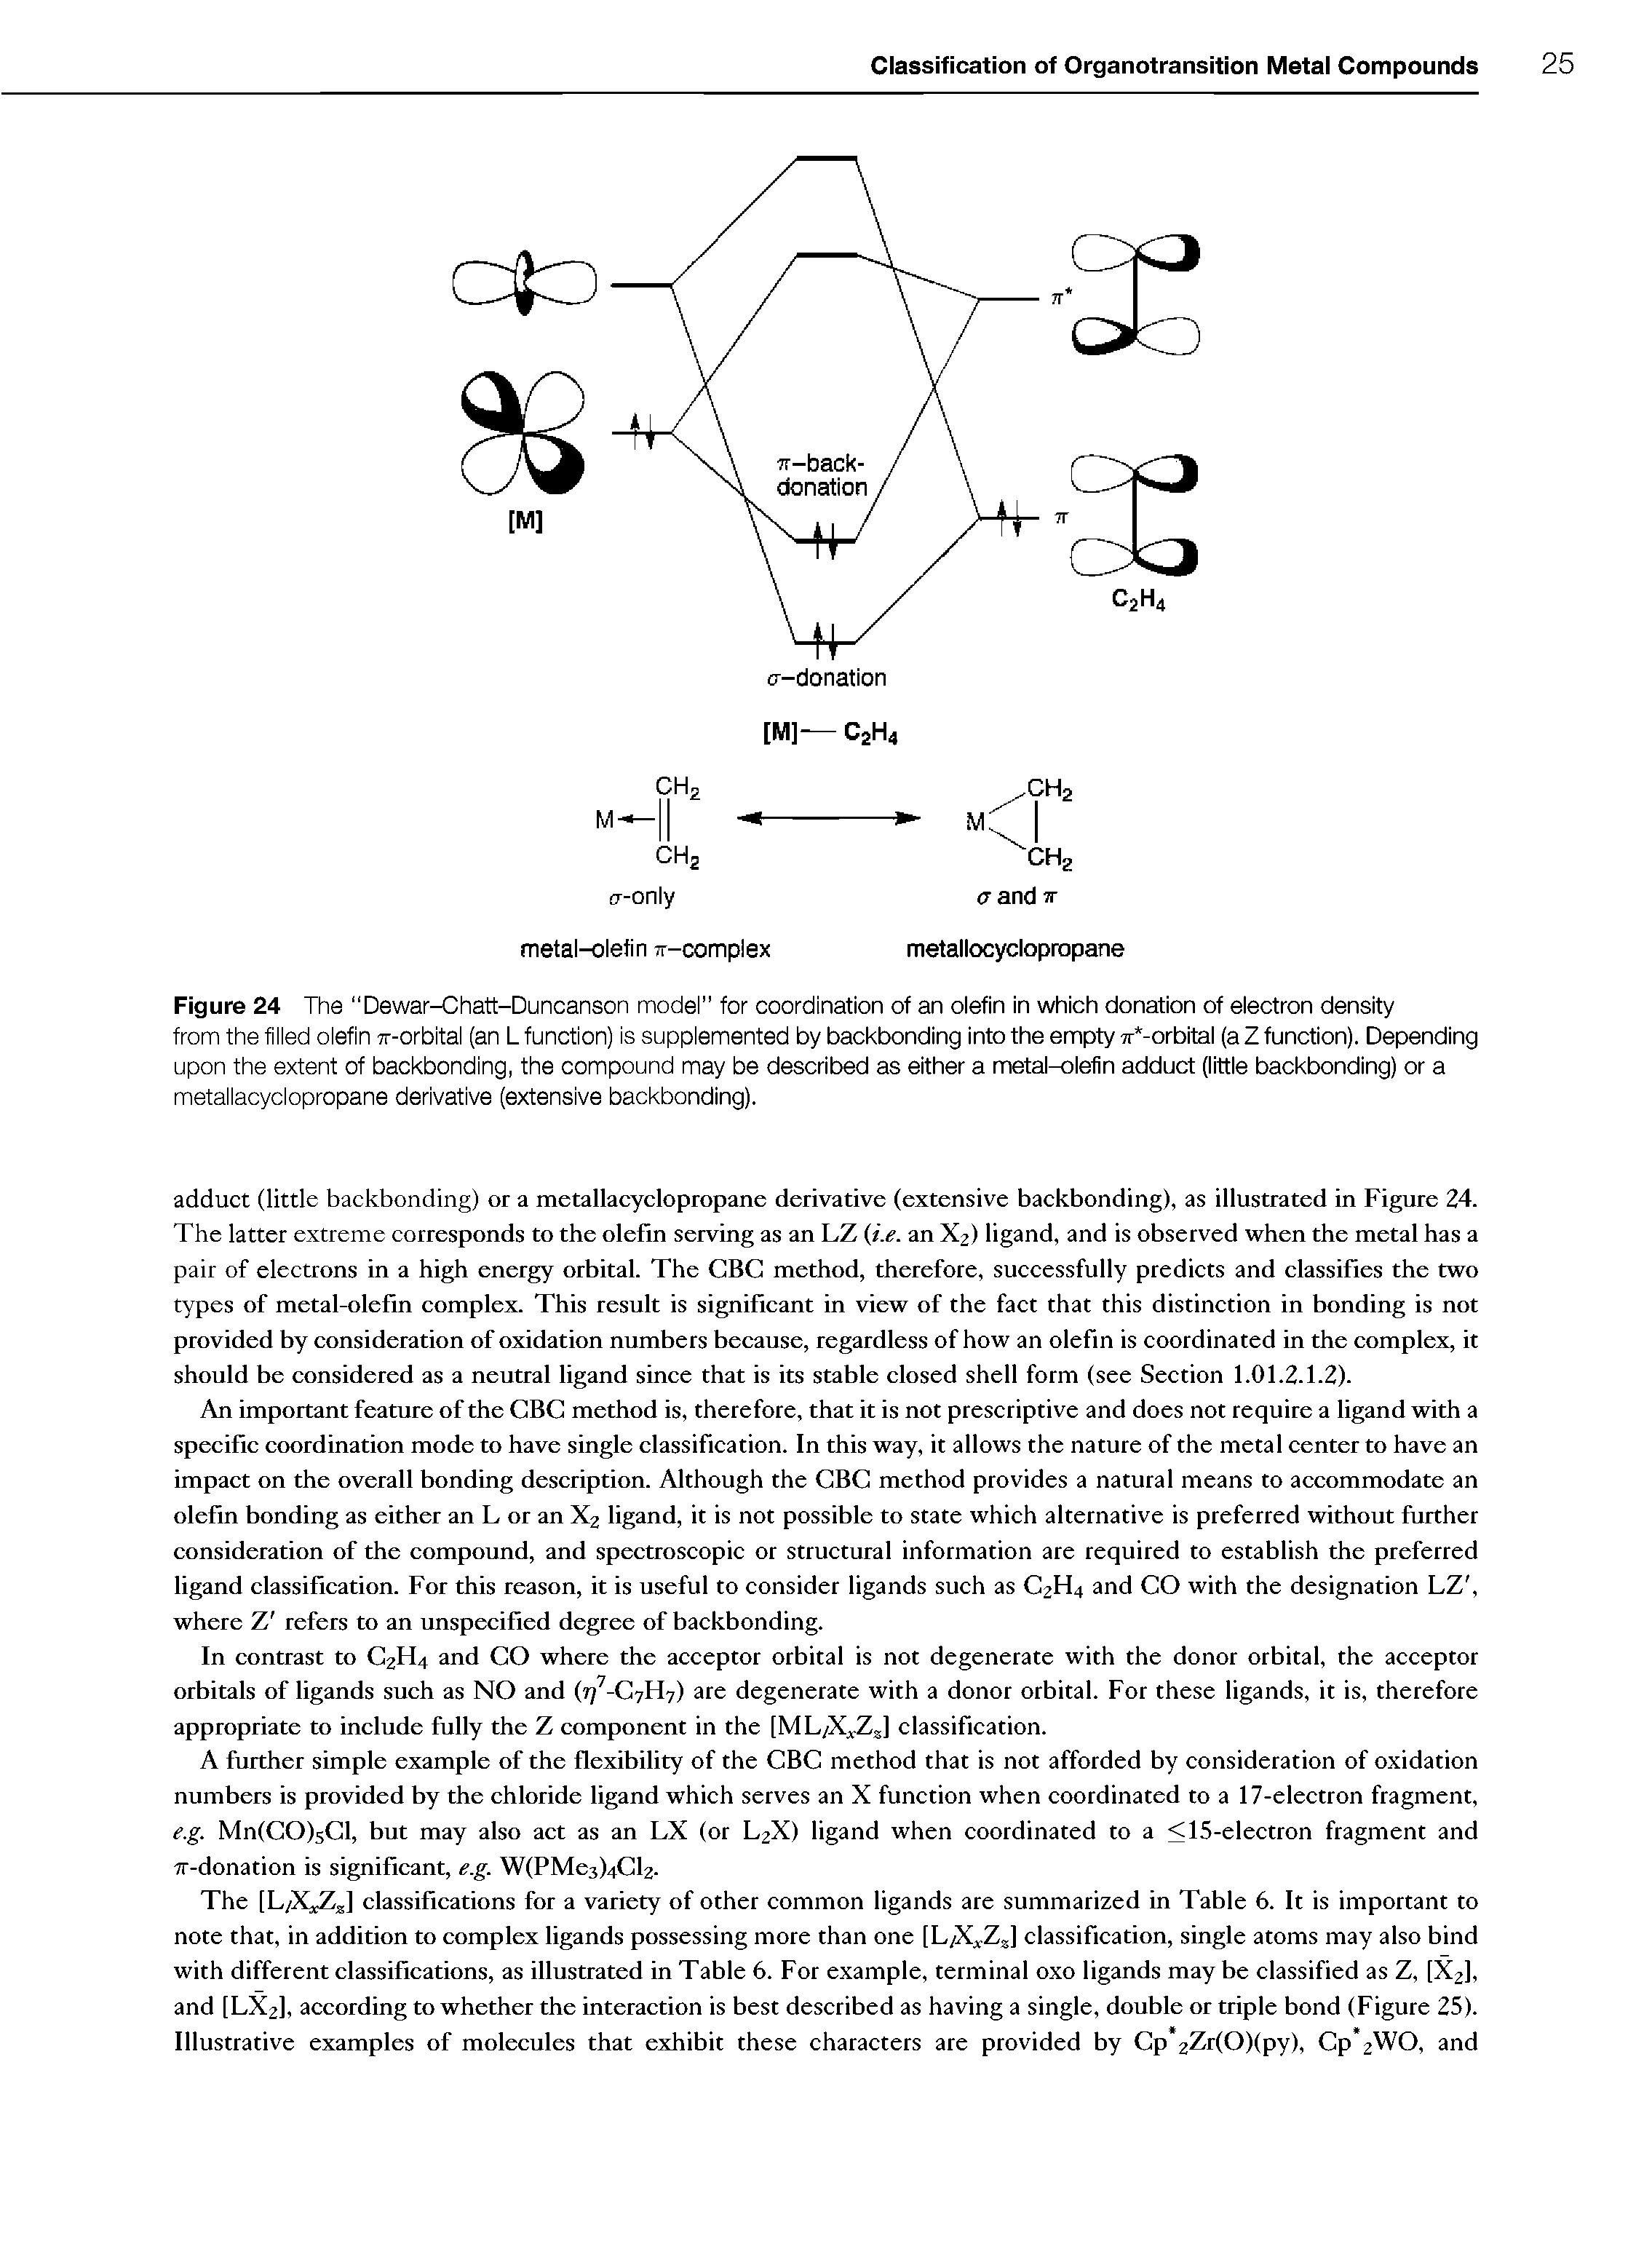 Figure 24 The Dewar-Chatt-Duncanson model" for coordination of an olefin in which donation of electron density from the filled olefin rr-orbital (an L function) is supplemented by backbonding into the empty 7r -orbital (aZfunction). Depending upon the extent of backbonding, the compound may be described as either a metal-olefin adduct (little backbonding) or a...